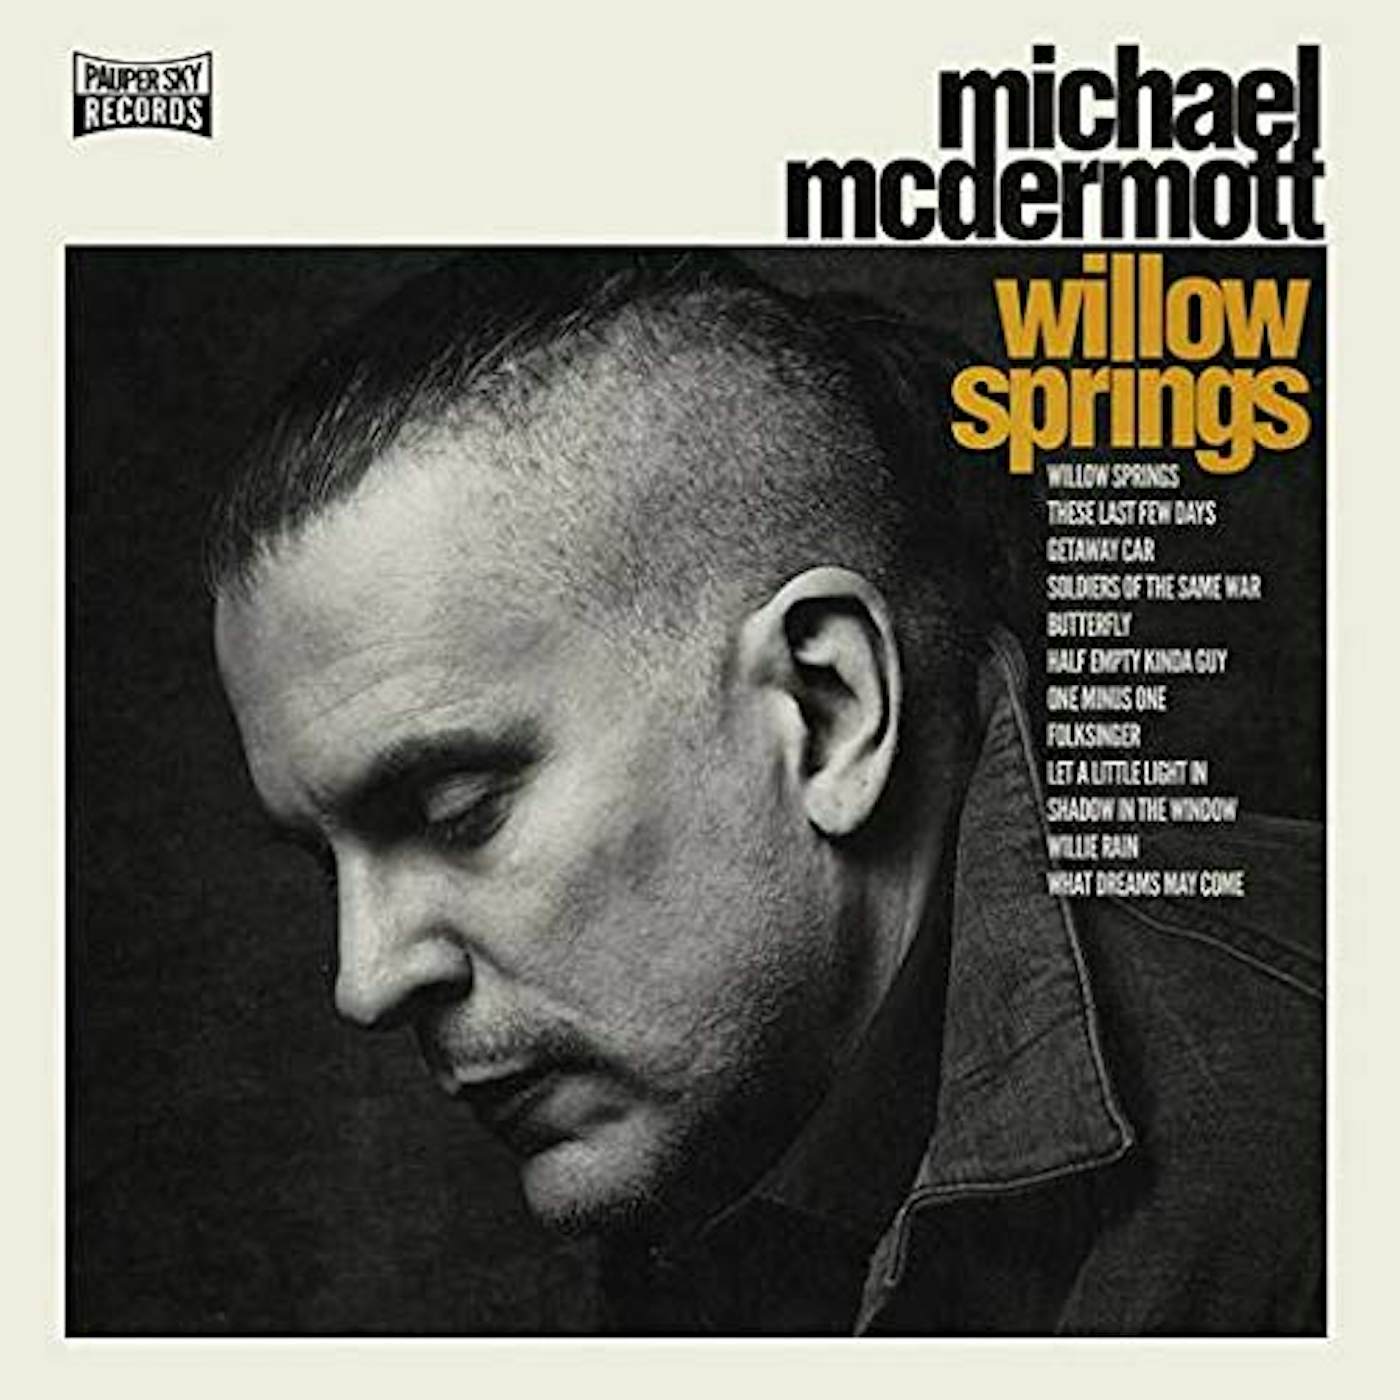 Michael McDermott WILLOW SPRINGS / OUT FROM UNDER Vinyl Record